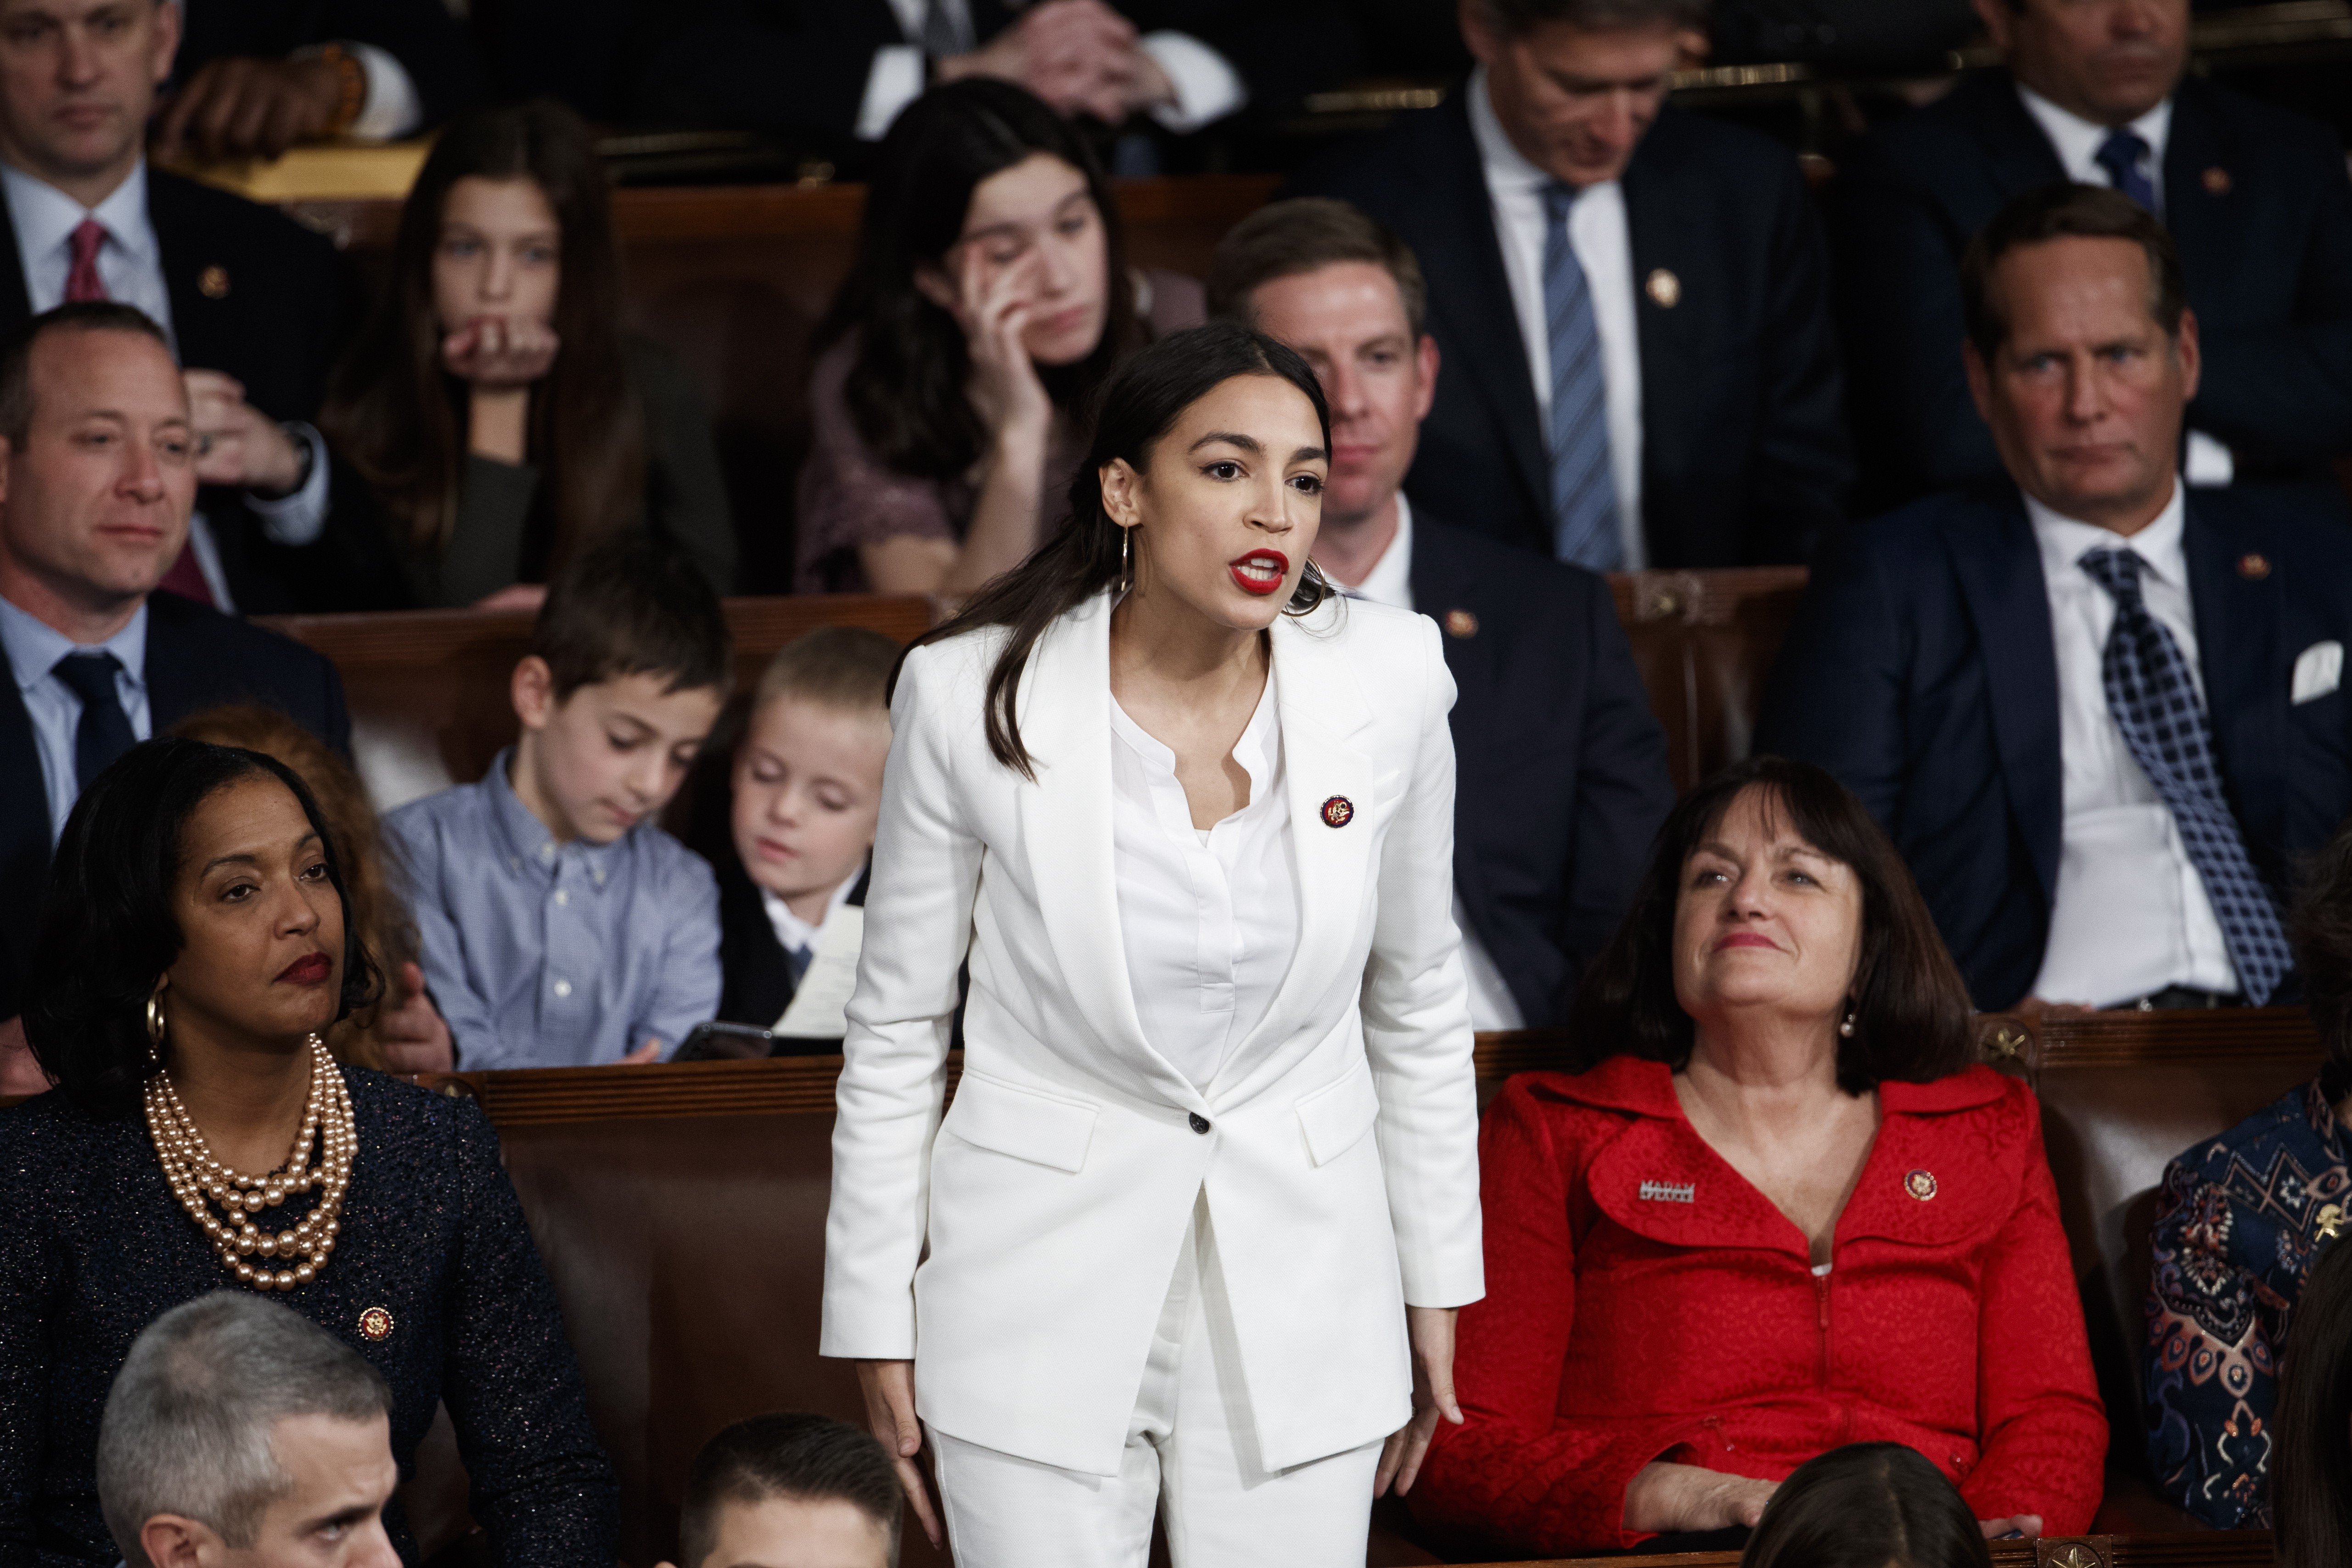 Alexandria Ocasio-Cortez, the youngest woman ever elected to US Congress, wore a white pantsuit as she cast her vote for Nancy Pelosi to be Speaker of the House, in January. Photo: EPA